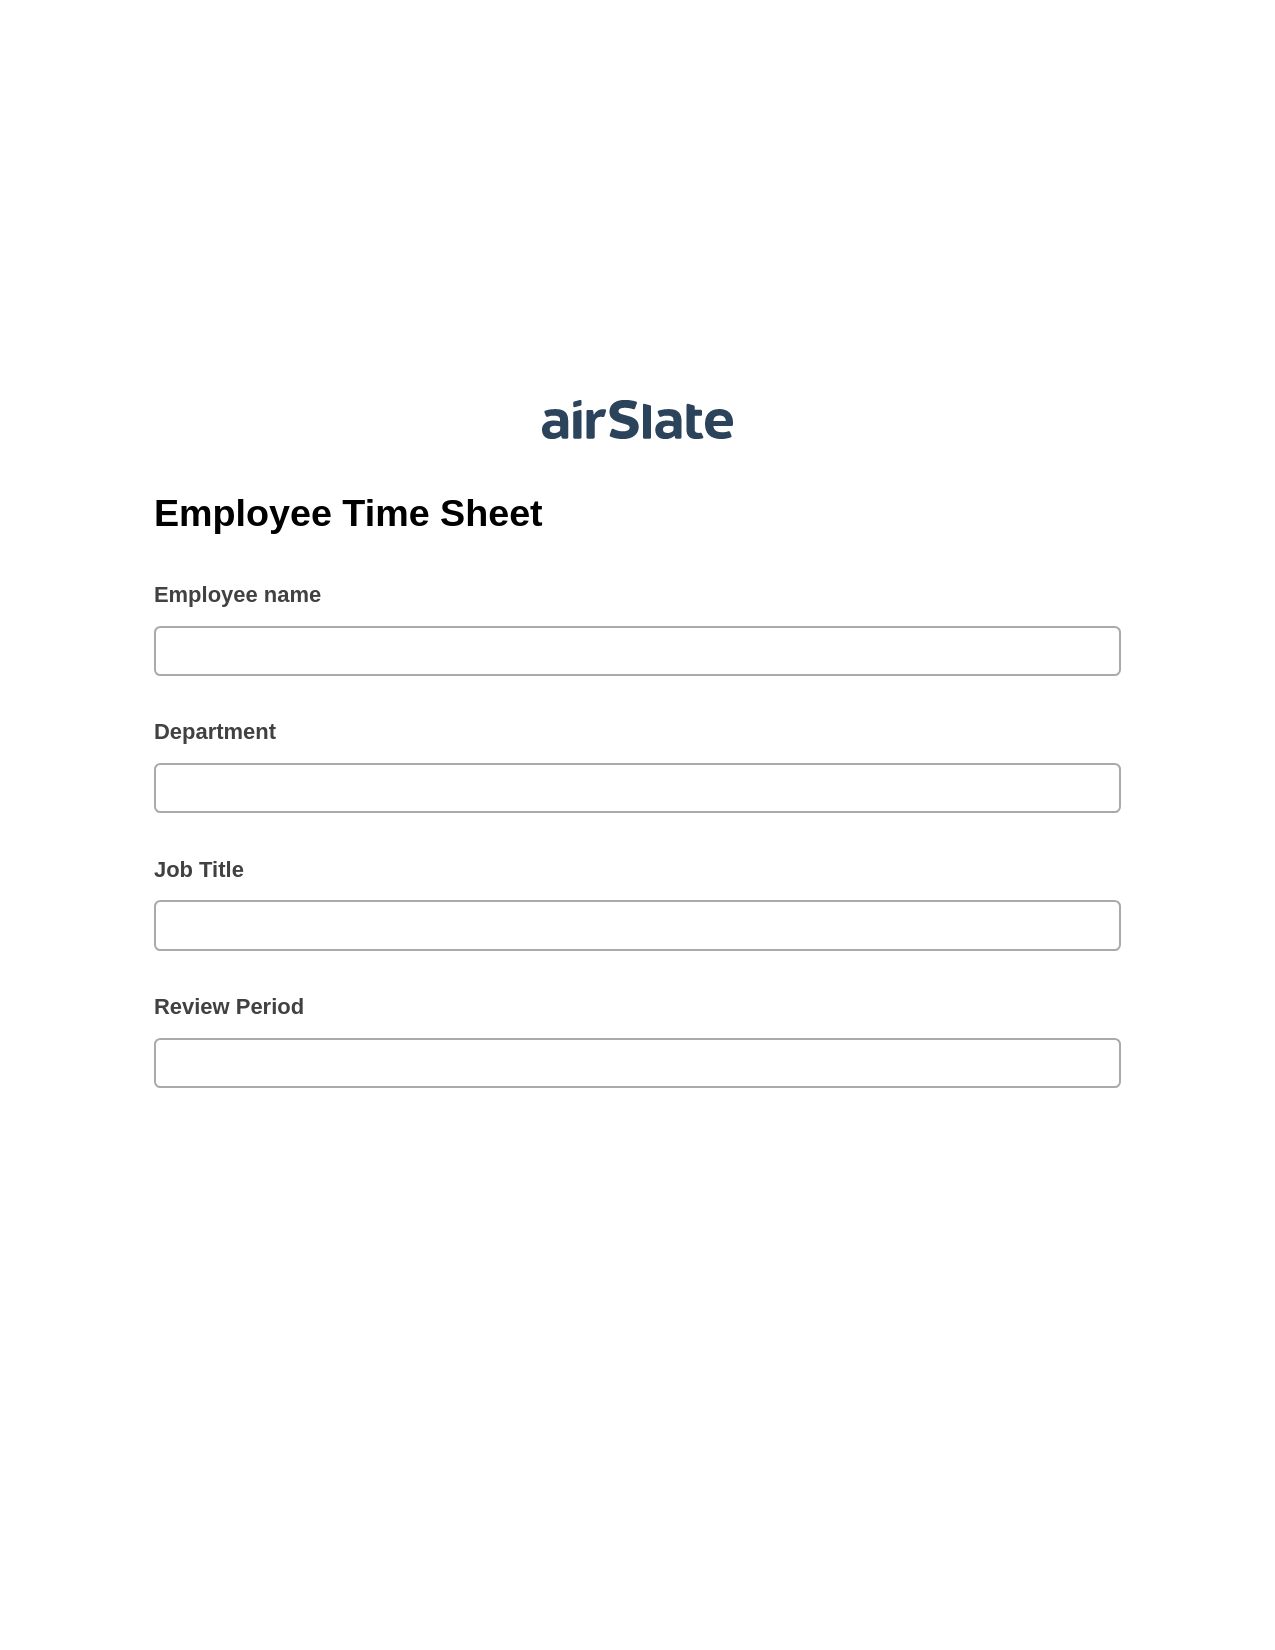 Multirole Employee Time Sheet Pre-fill from MS Dynamics 365 Records, Create Slate Reminder Bot, Export to WebMerge Bot